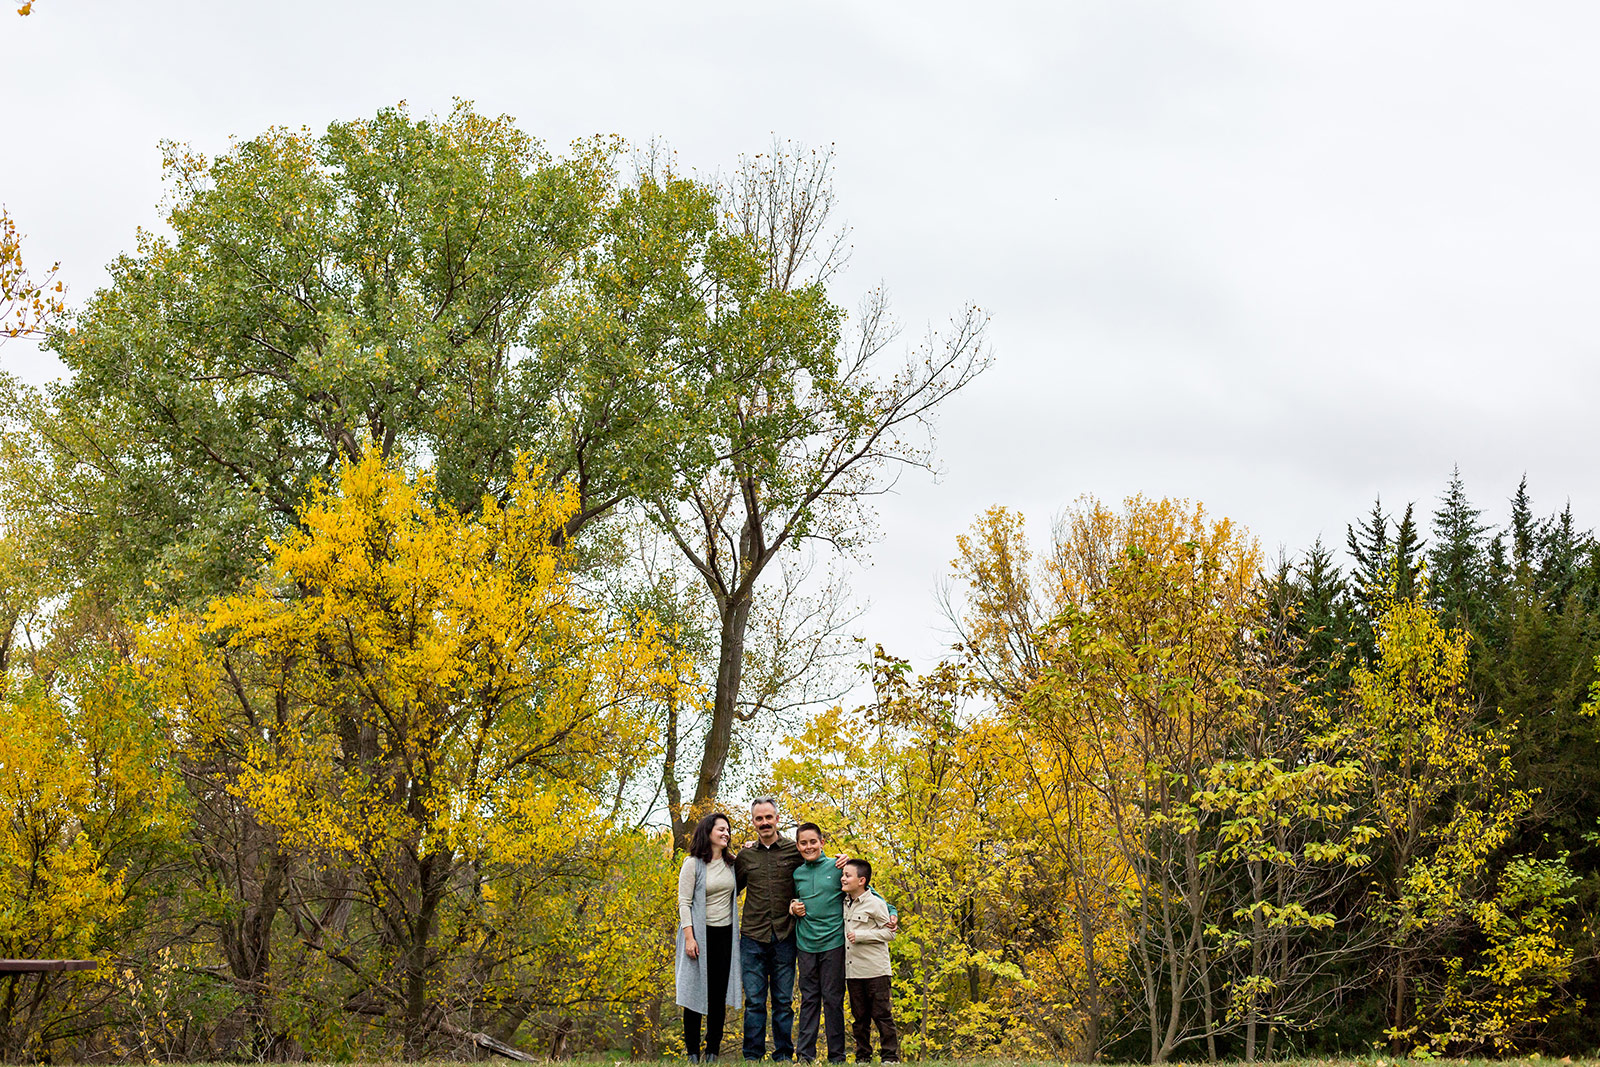 The Hassler family stands with arms linked in front of an array of fall trees.